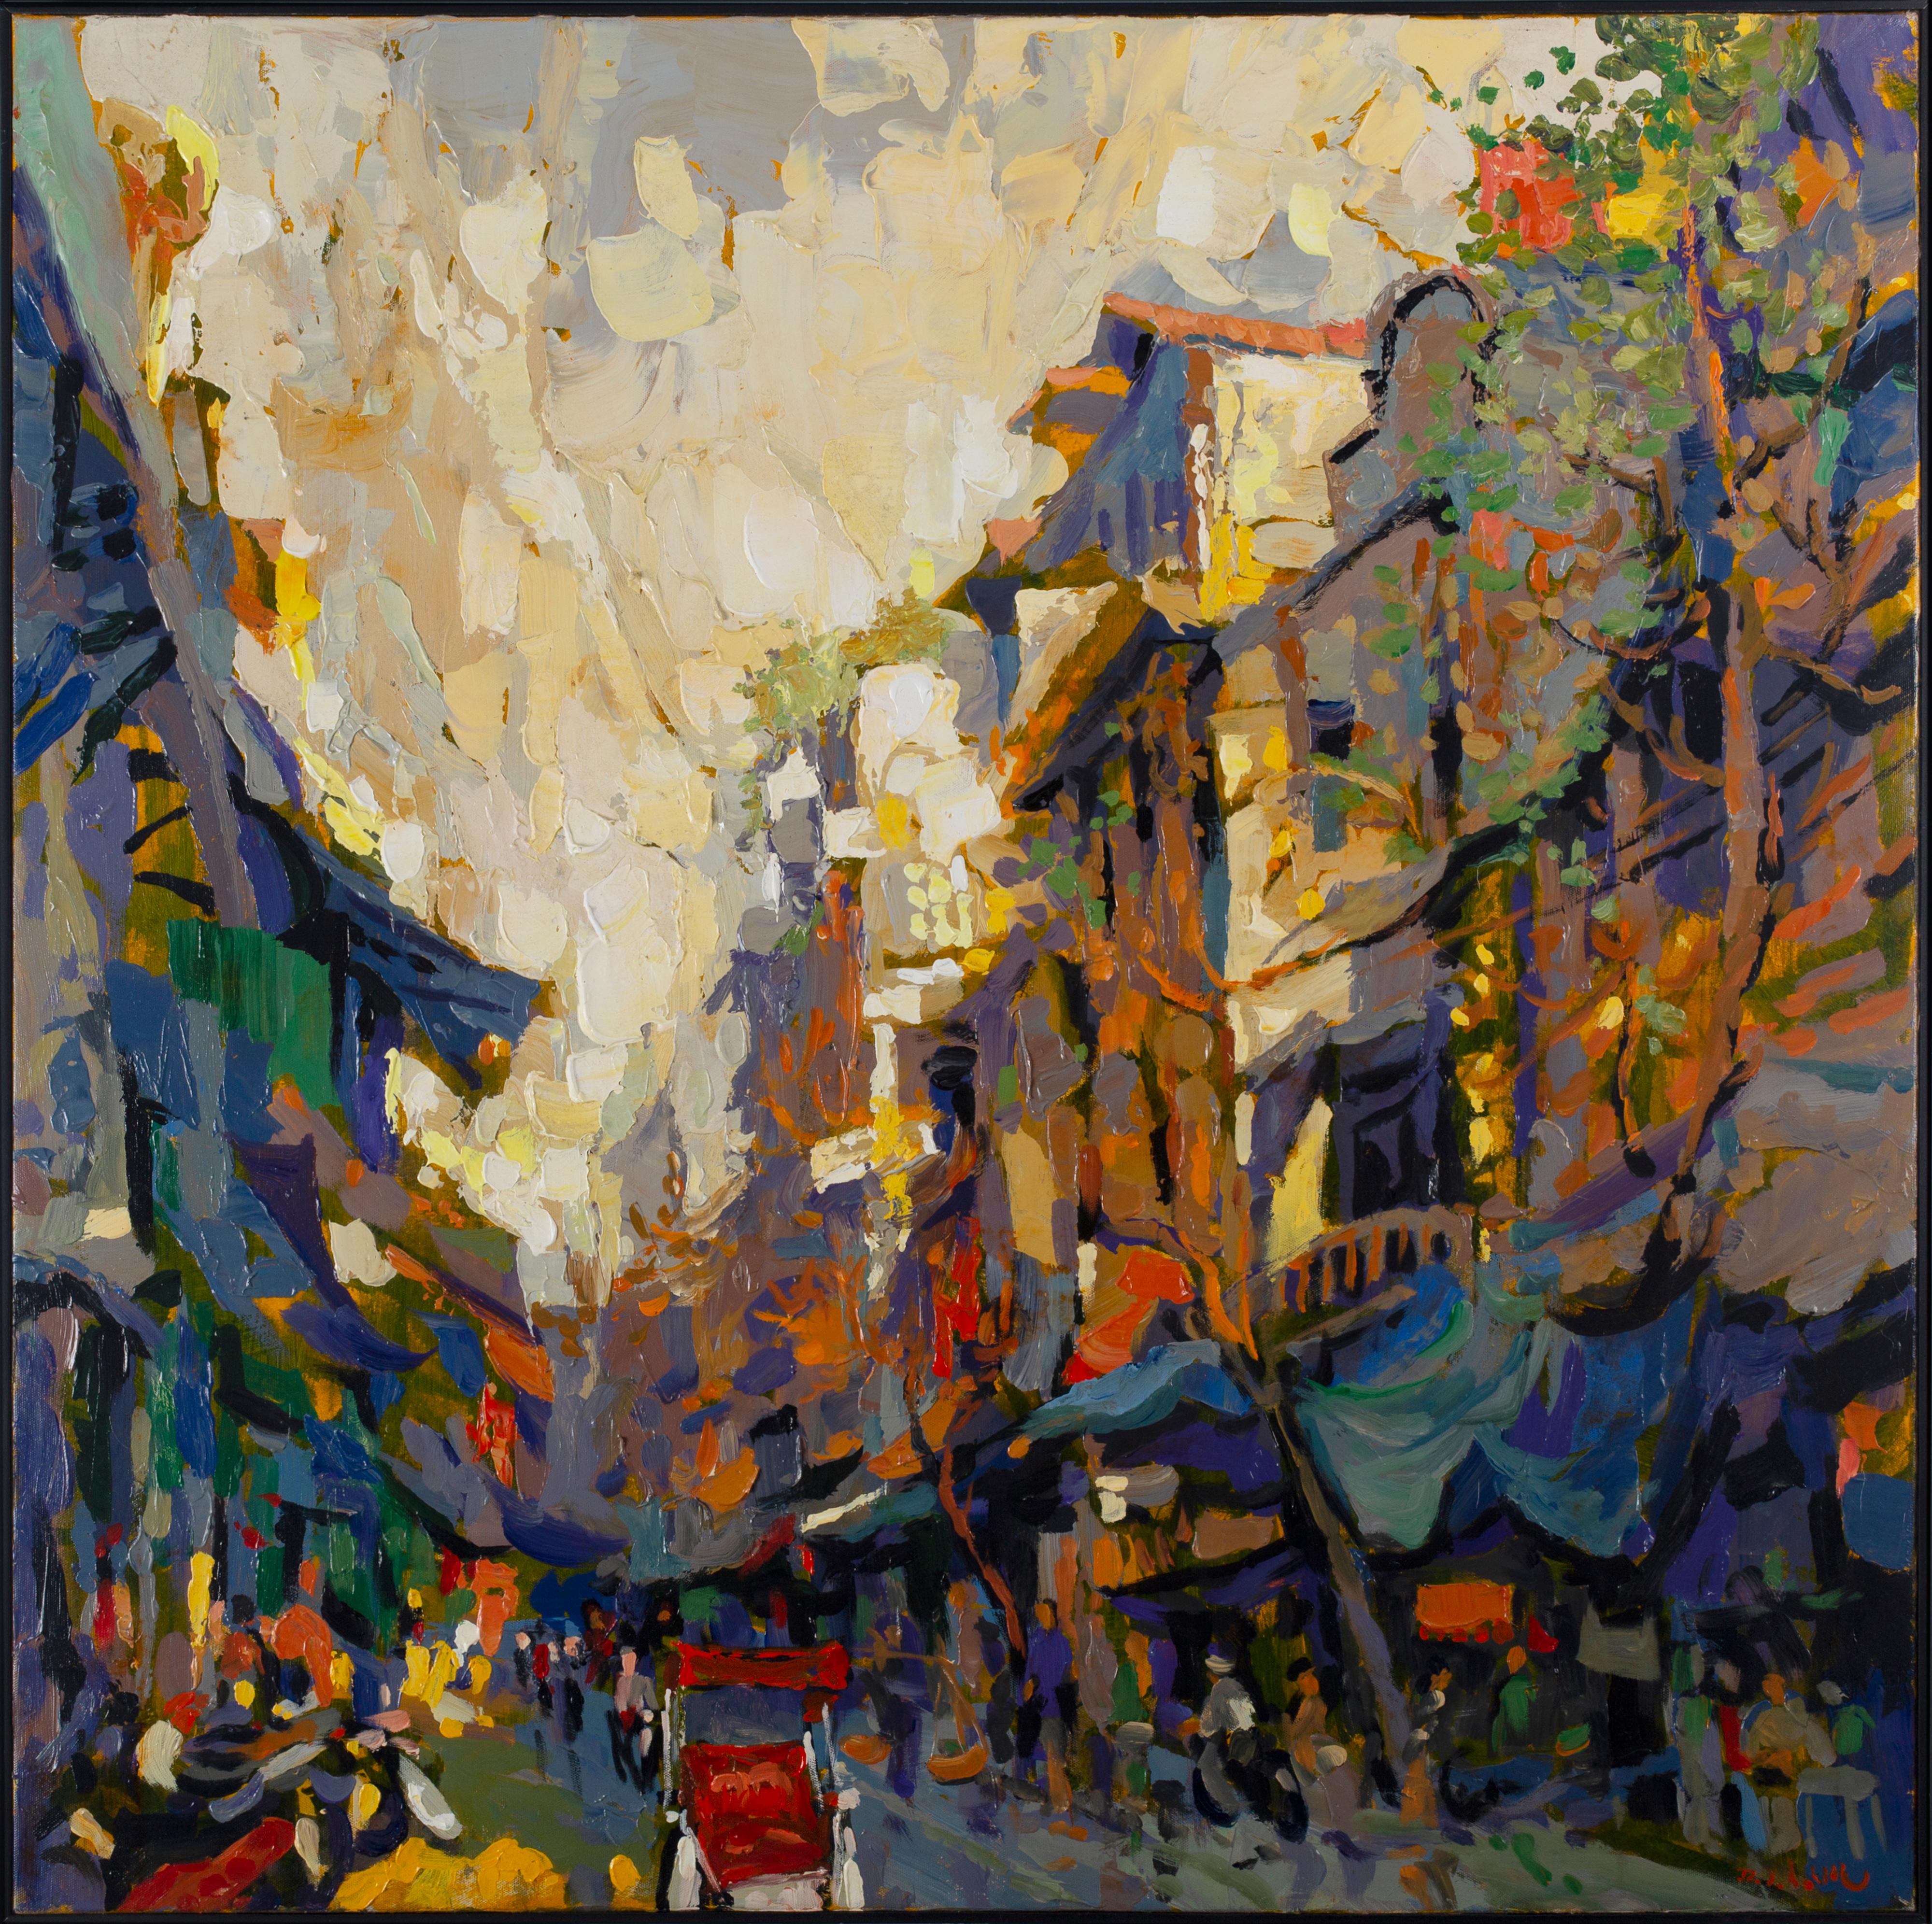 Duong Viet Nam is a Vietnamese contemporary artist known for his Post-Impressionistic style of painting. He often captures city scenes during busy parts of the day.  In his paintings you notice the French architecture which is seen throughout Hanoi.